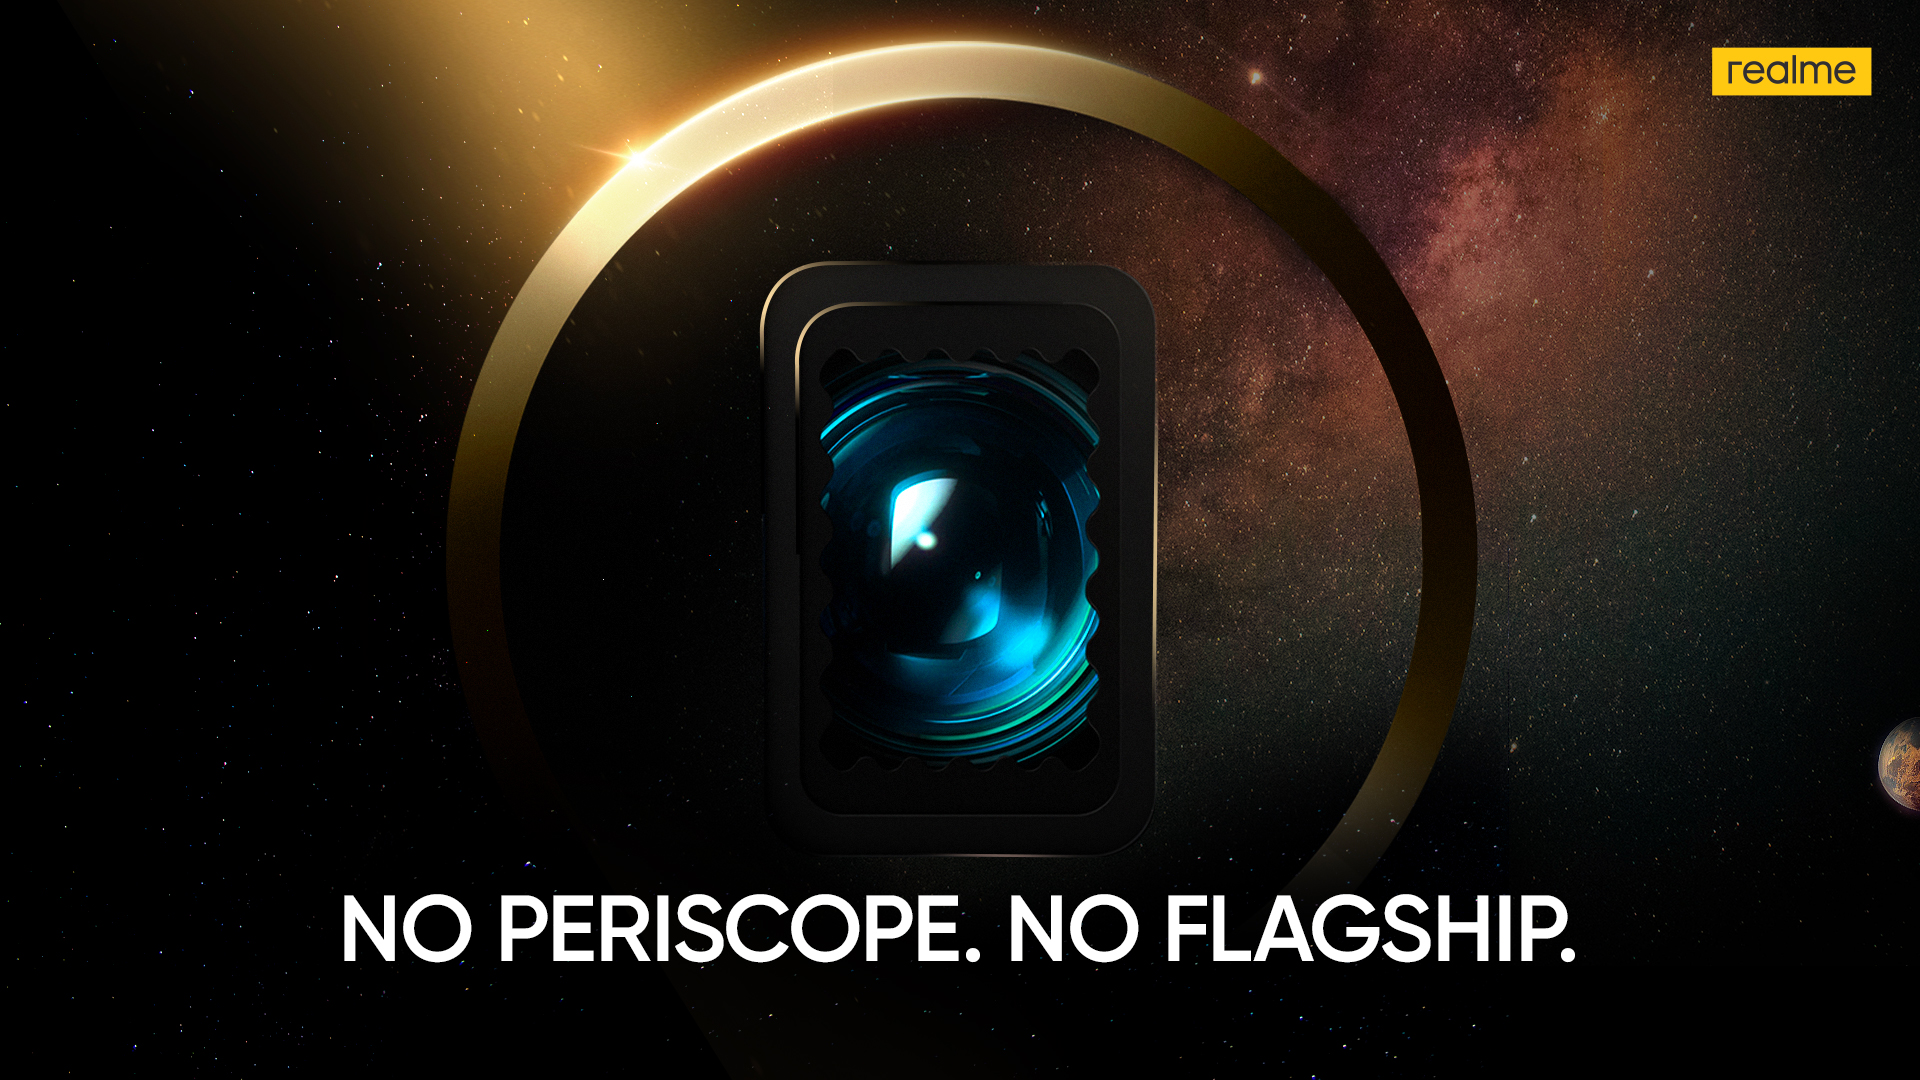 Realme teases upcoming smartphone with periscope camera for global market